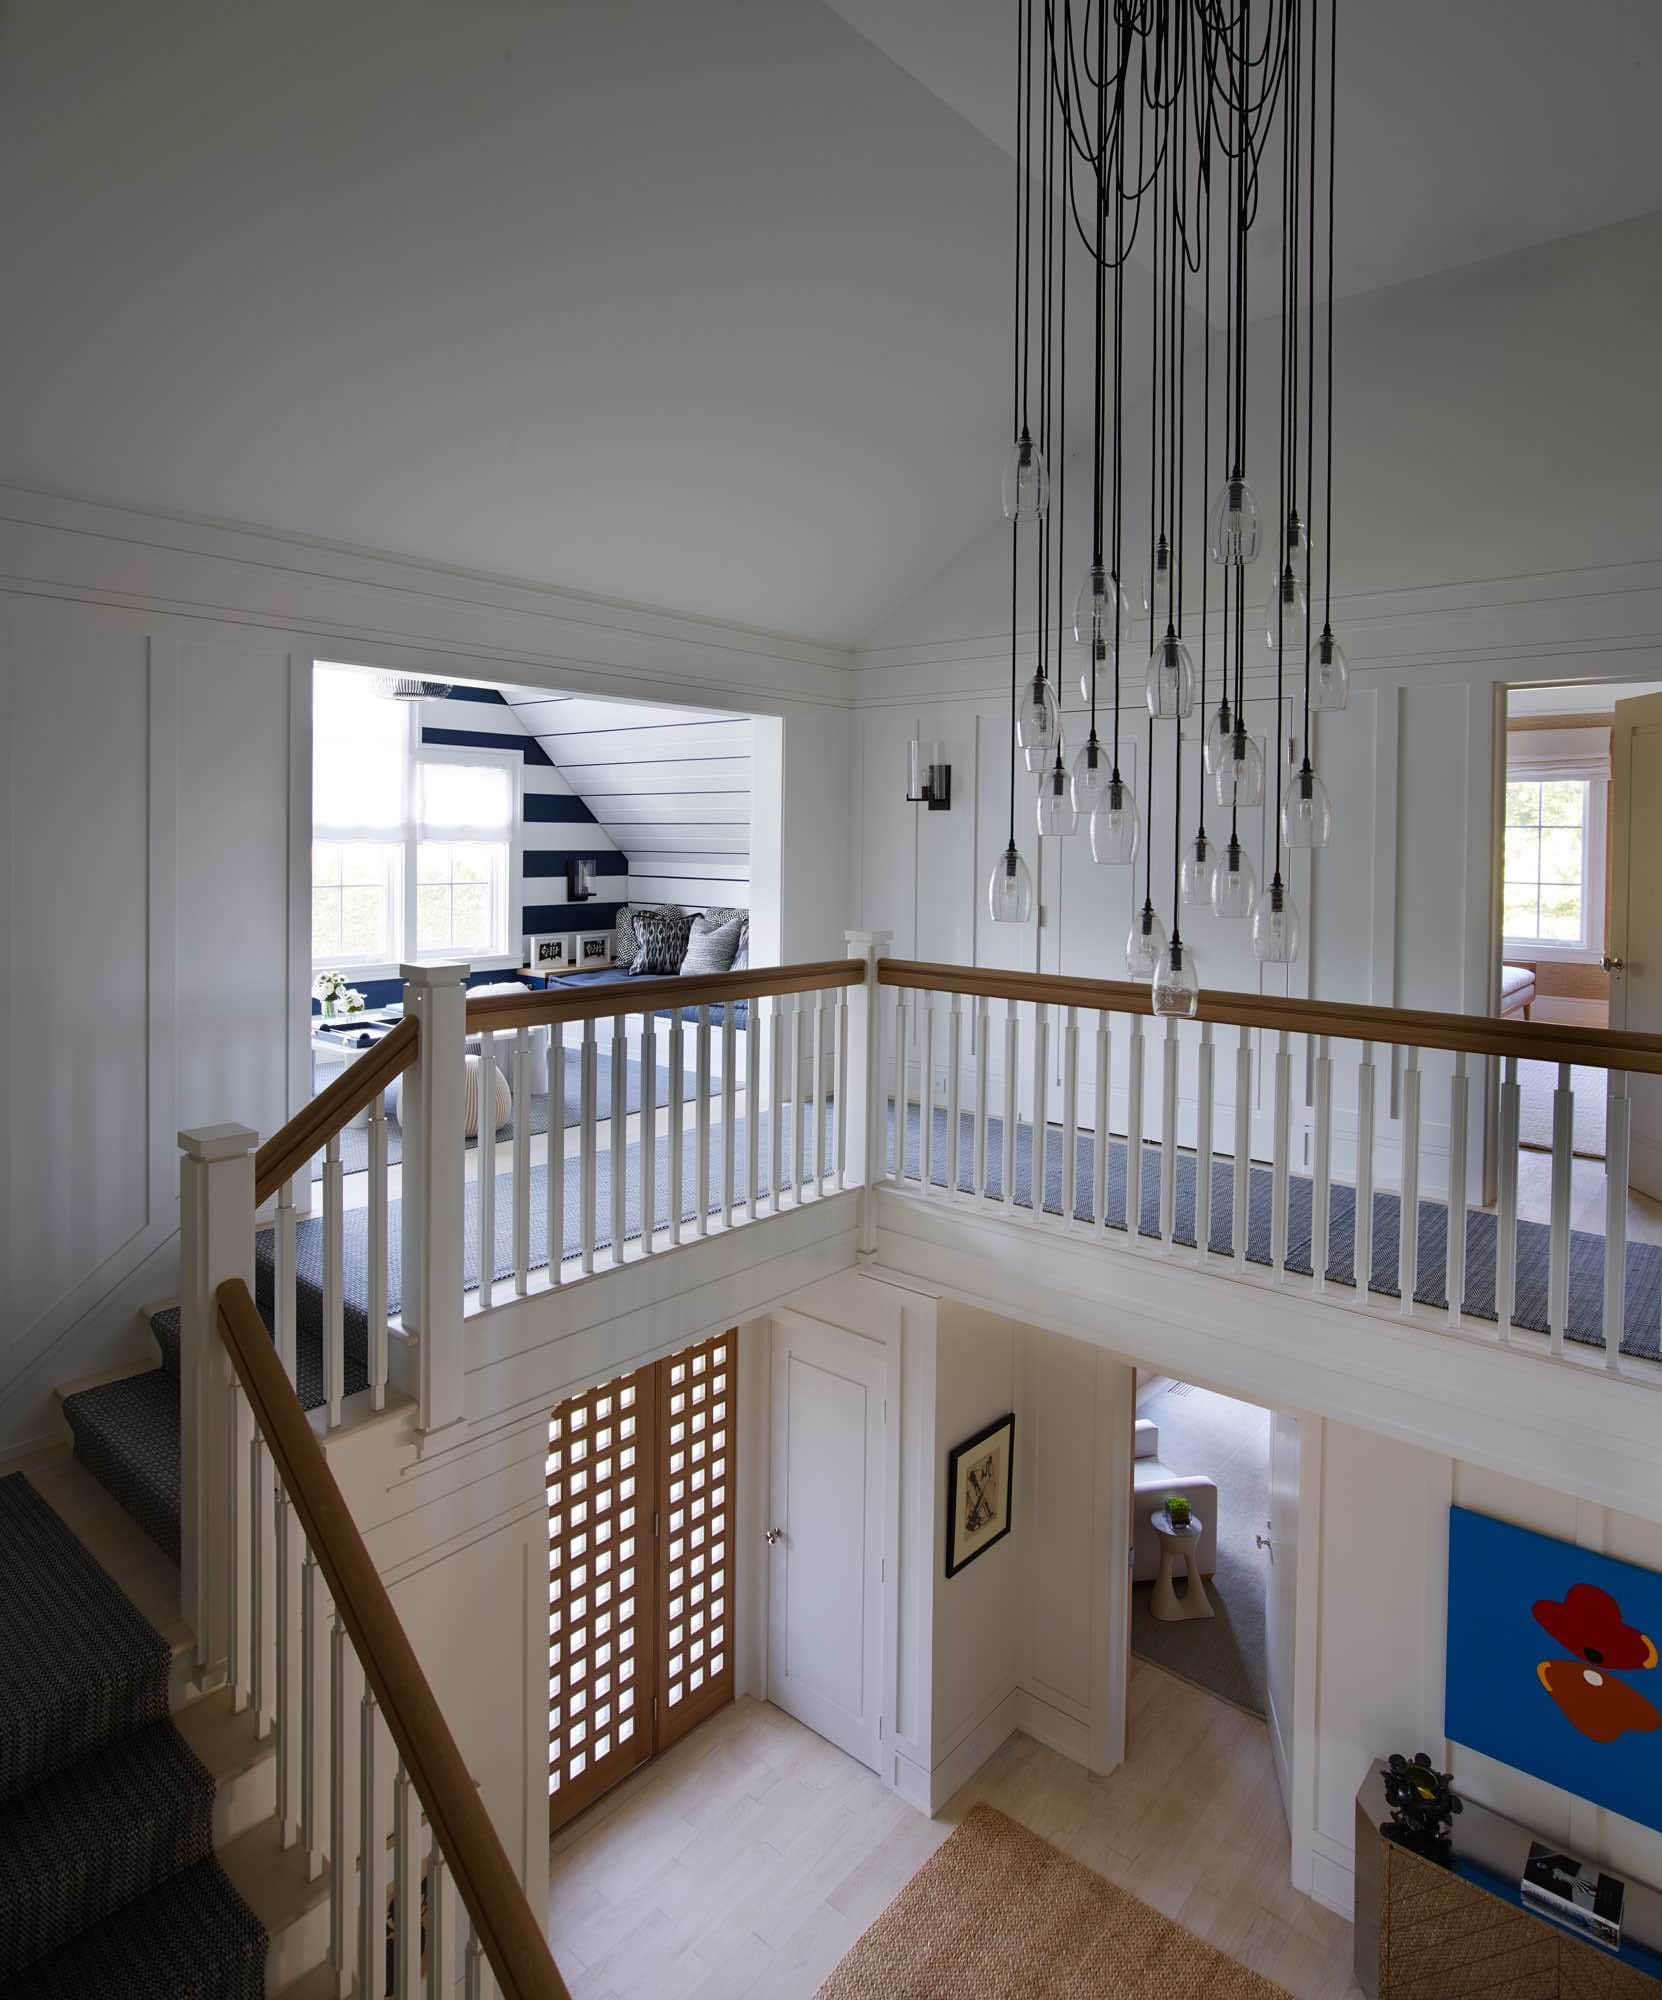 This image is a view up the stairway to the second-floor hallway in the Bridgehampton home designed by Studio Carol Egan.  A Scripted pendant chandelier by Alison Berger hangs from the ceiling in blackened Bronze and engraved glass pendants that are contrasted against the white shaker panels of the 2nd Floor stair hallway.  There is a custom woven runner carpet on the stairway - Deep blue basket weave by Elizabeth Eakins.  You can see a nook at the top of the stair with built in banquettes for playing chess and backgammon.